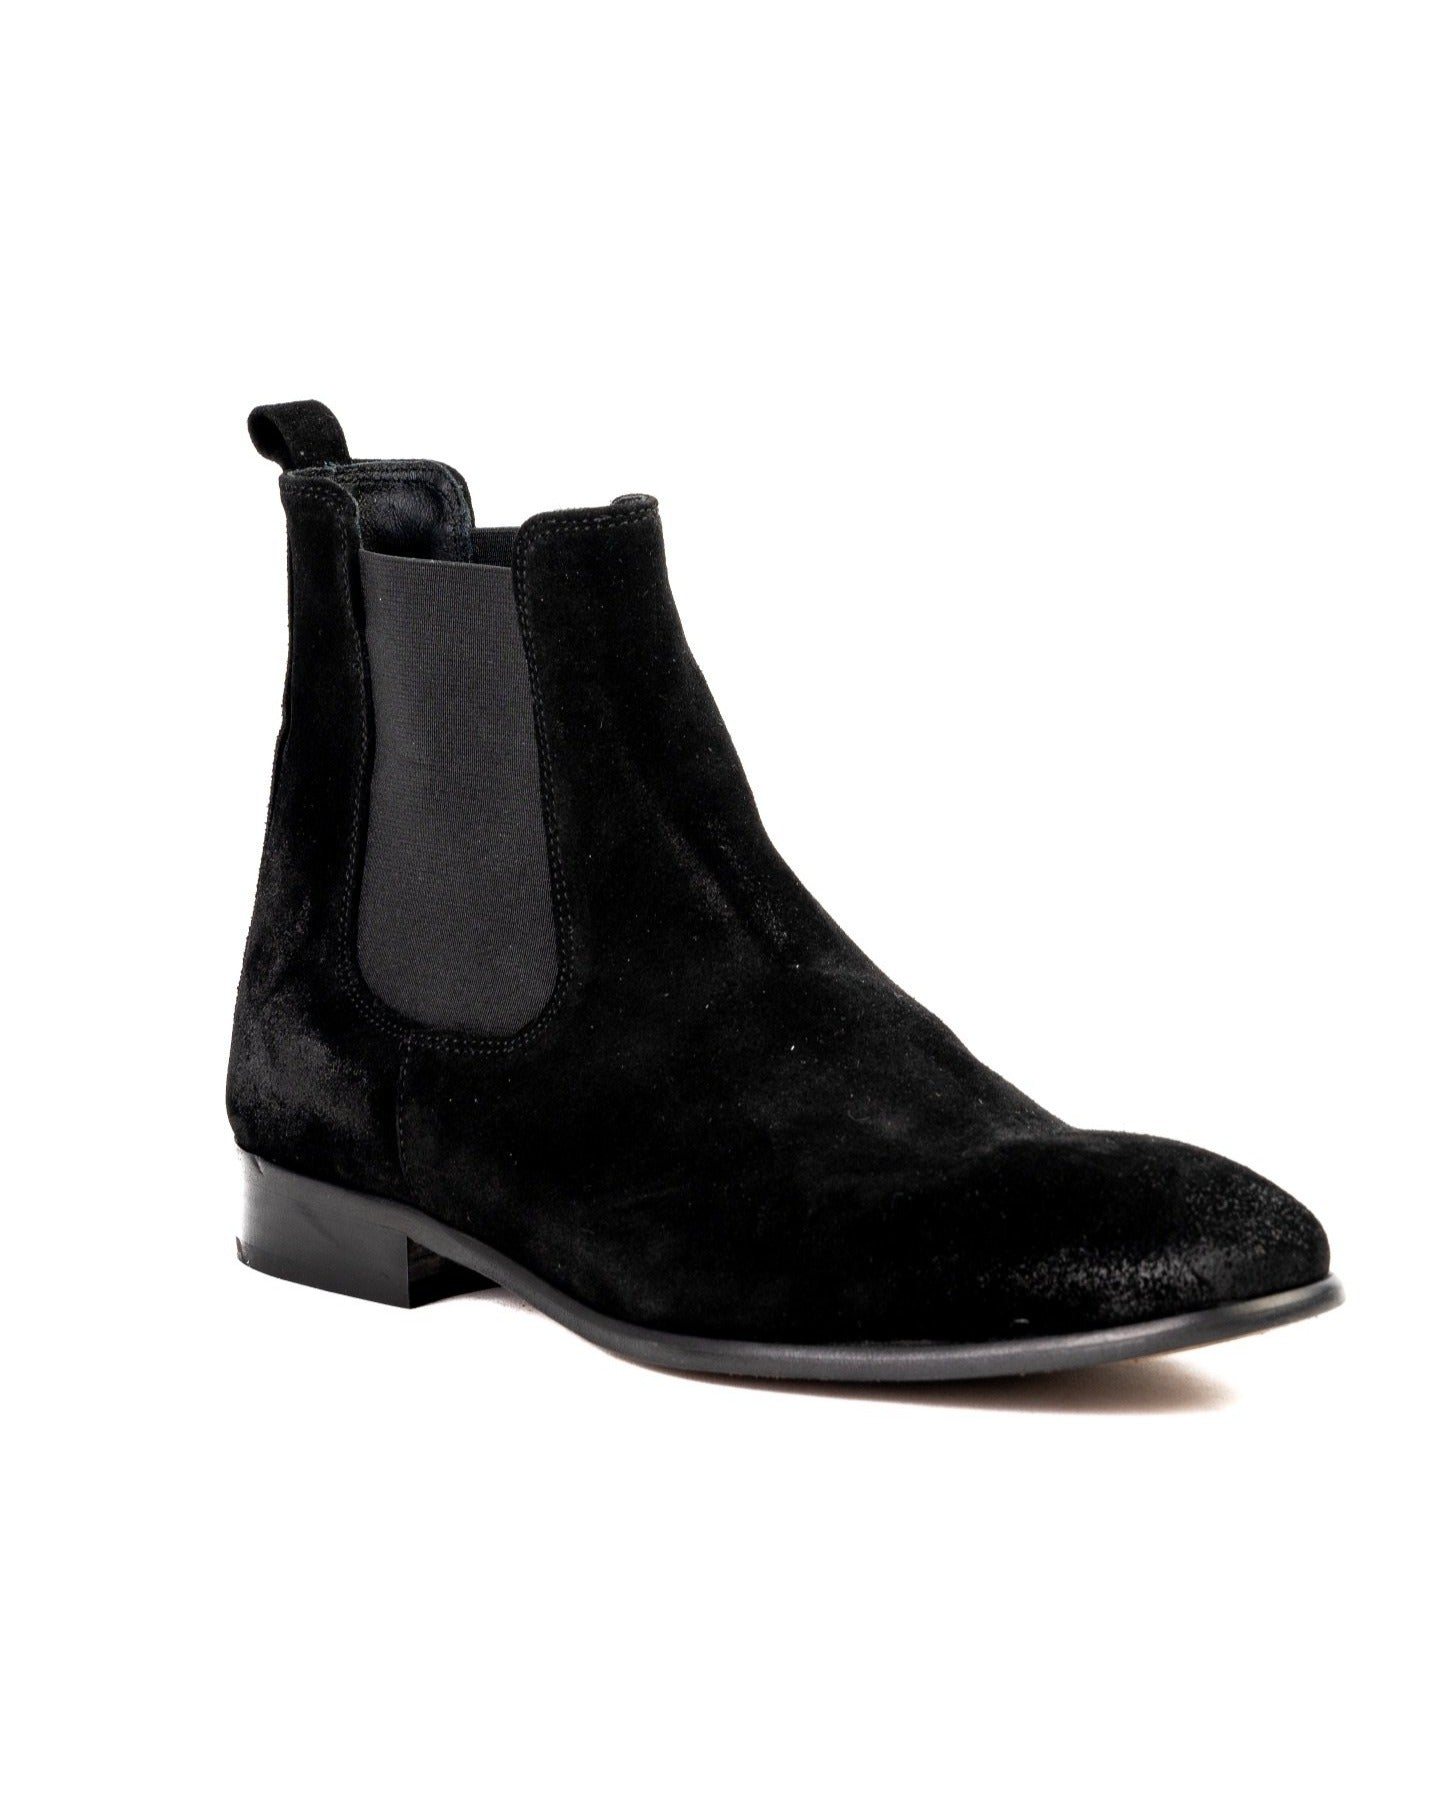 Dre - dirty black suede chelsea boots